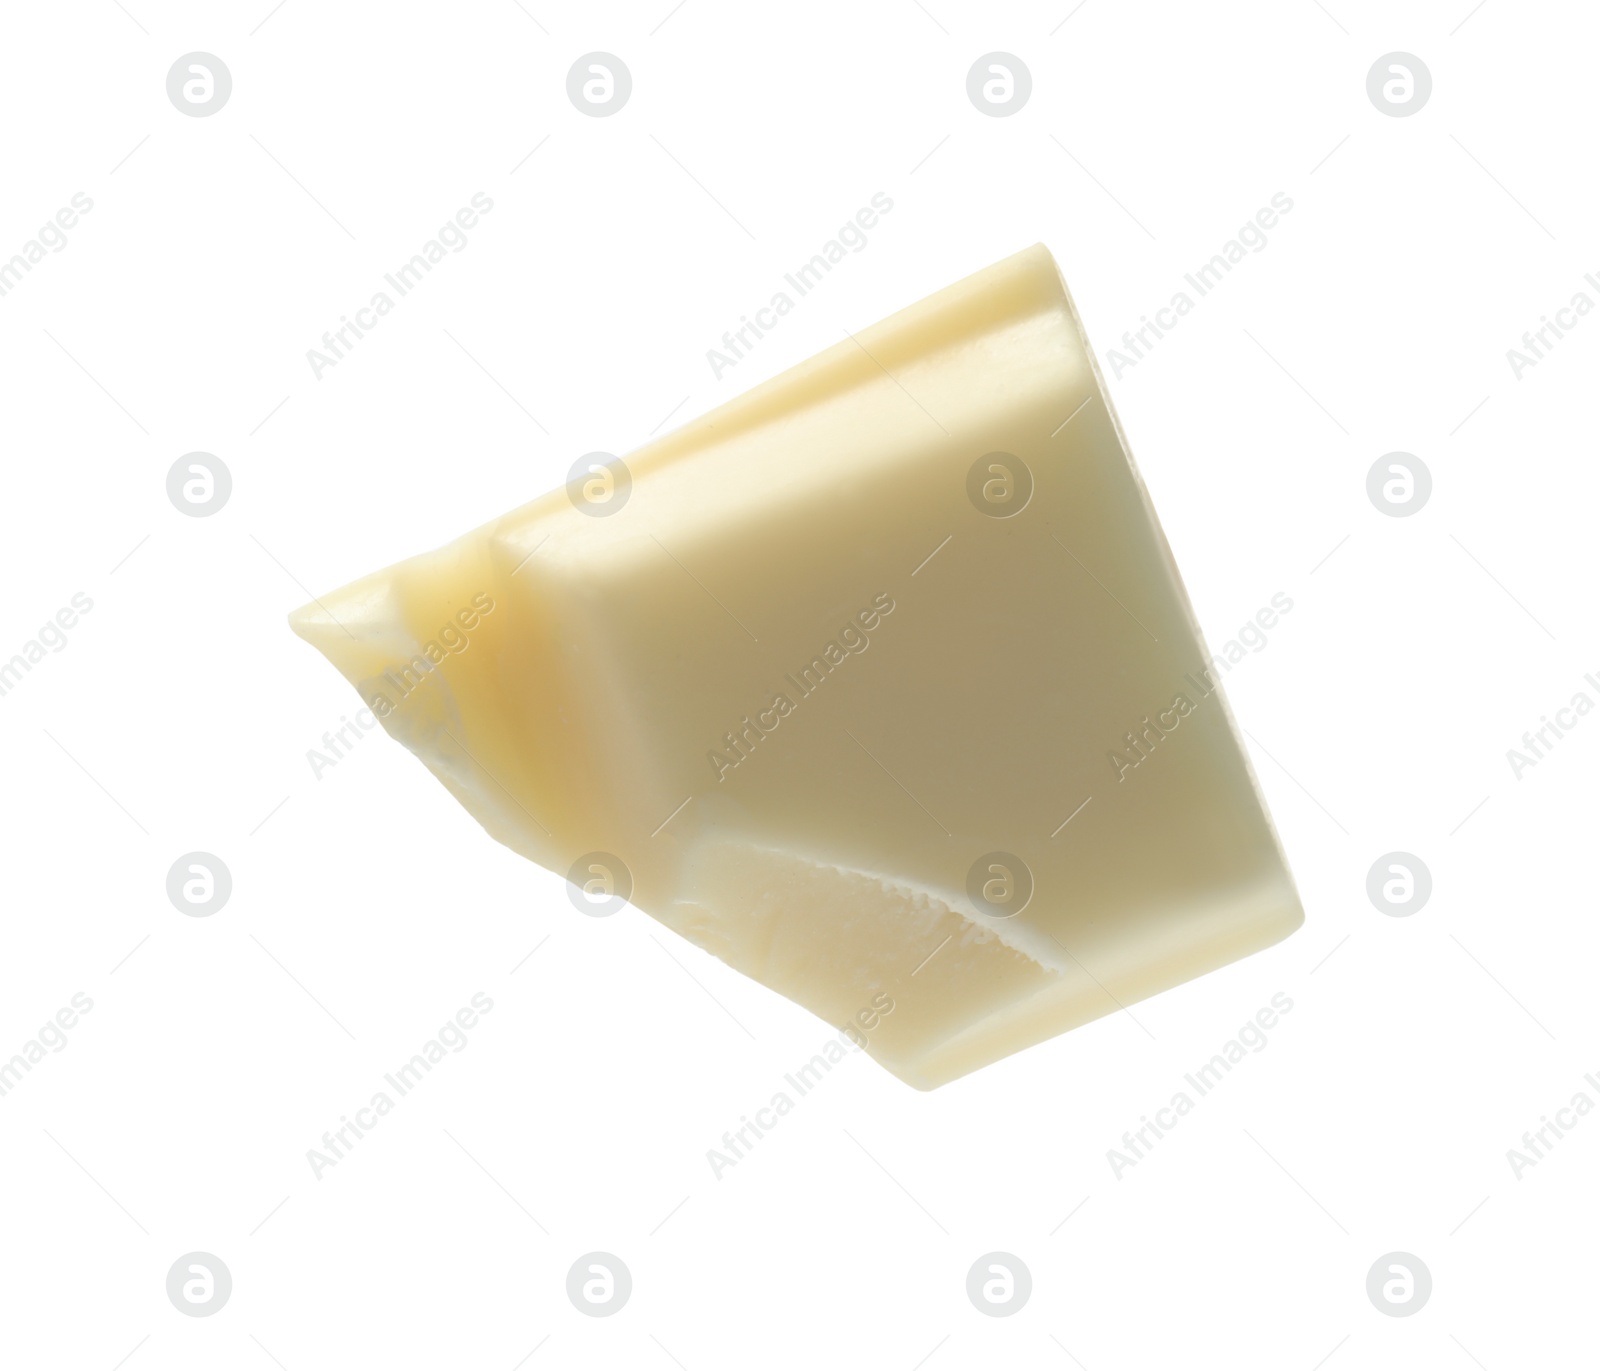 Photo of Piece of delicious chocolate bar isolated on white